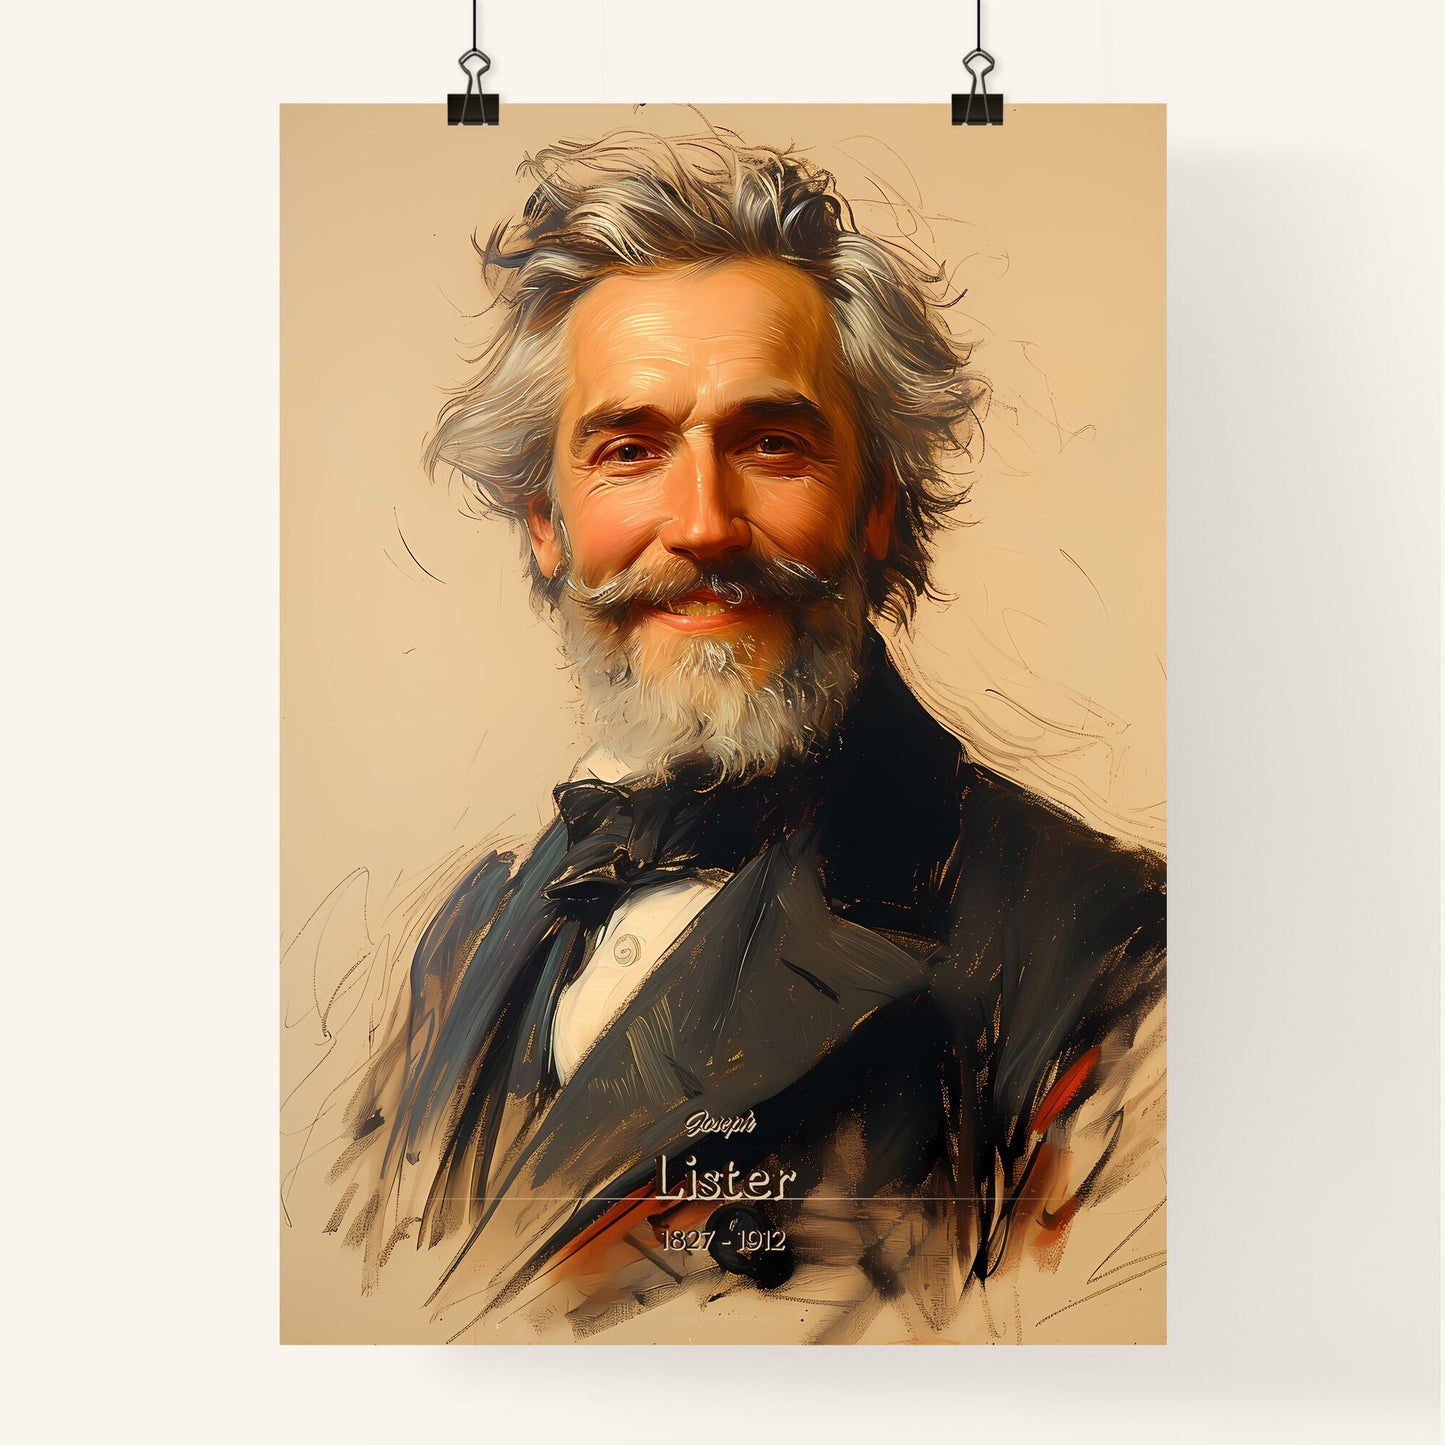 Joseph, Lister, 1827 - 1912, A Poster of a painting of a man with a beard Default Title